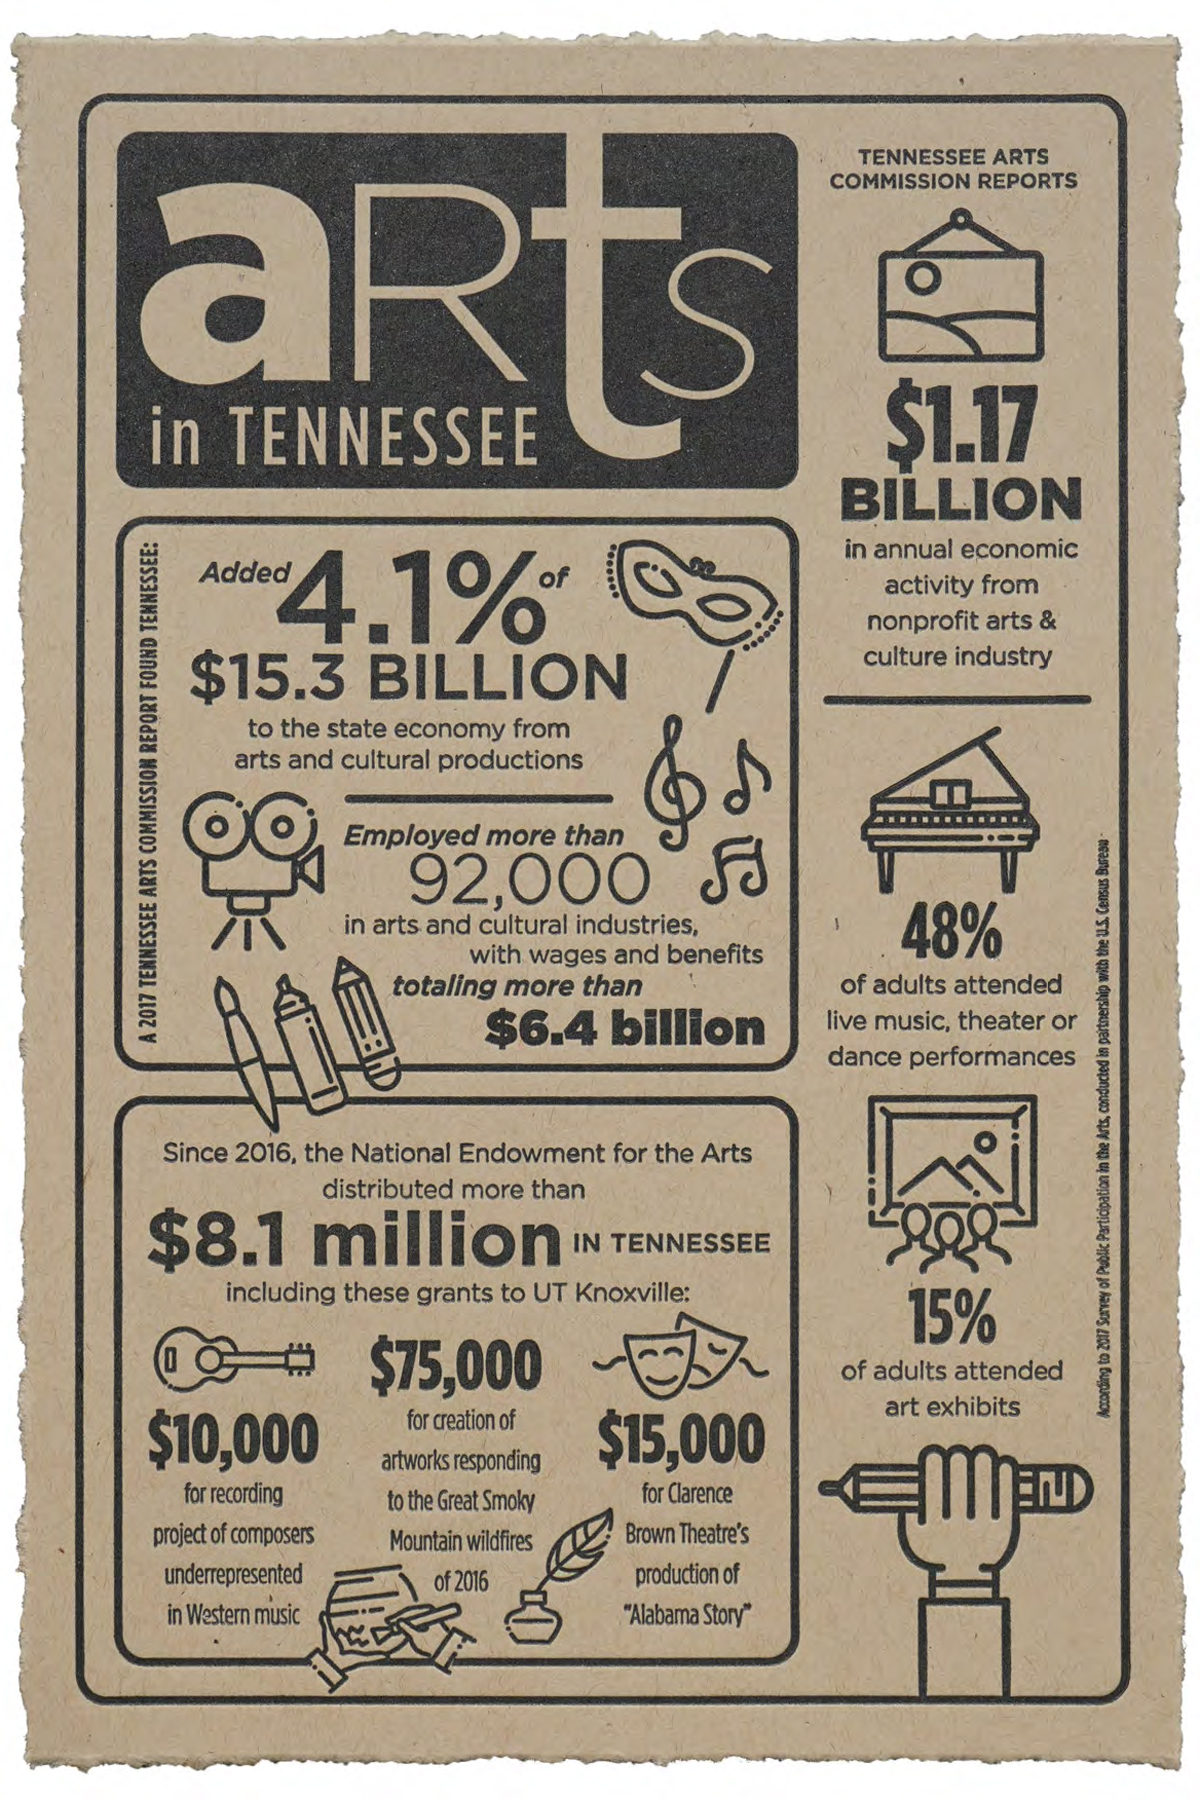 Arts in Tennessee Infographic